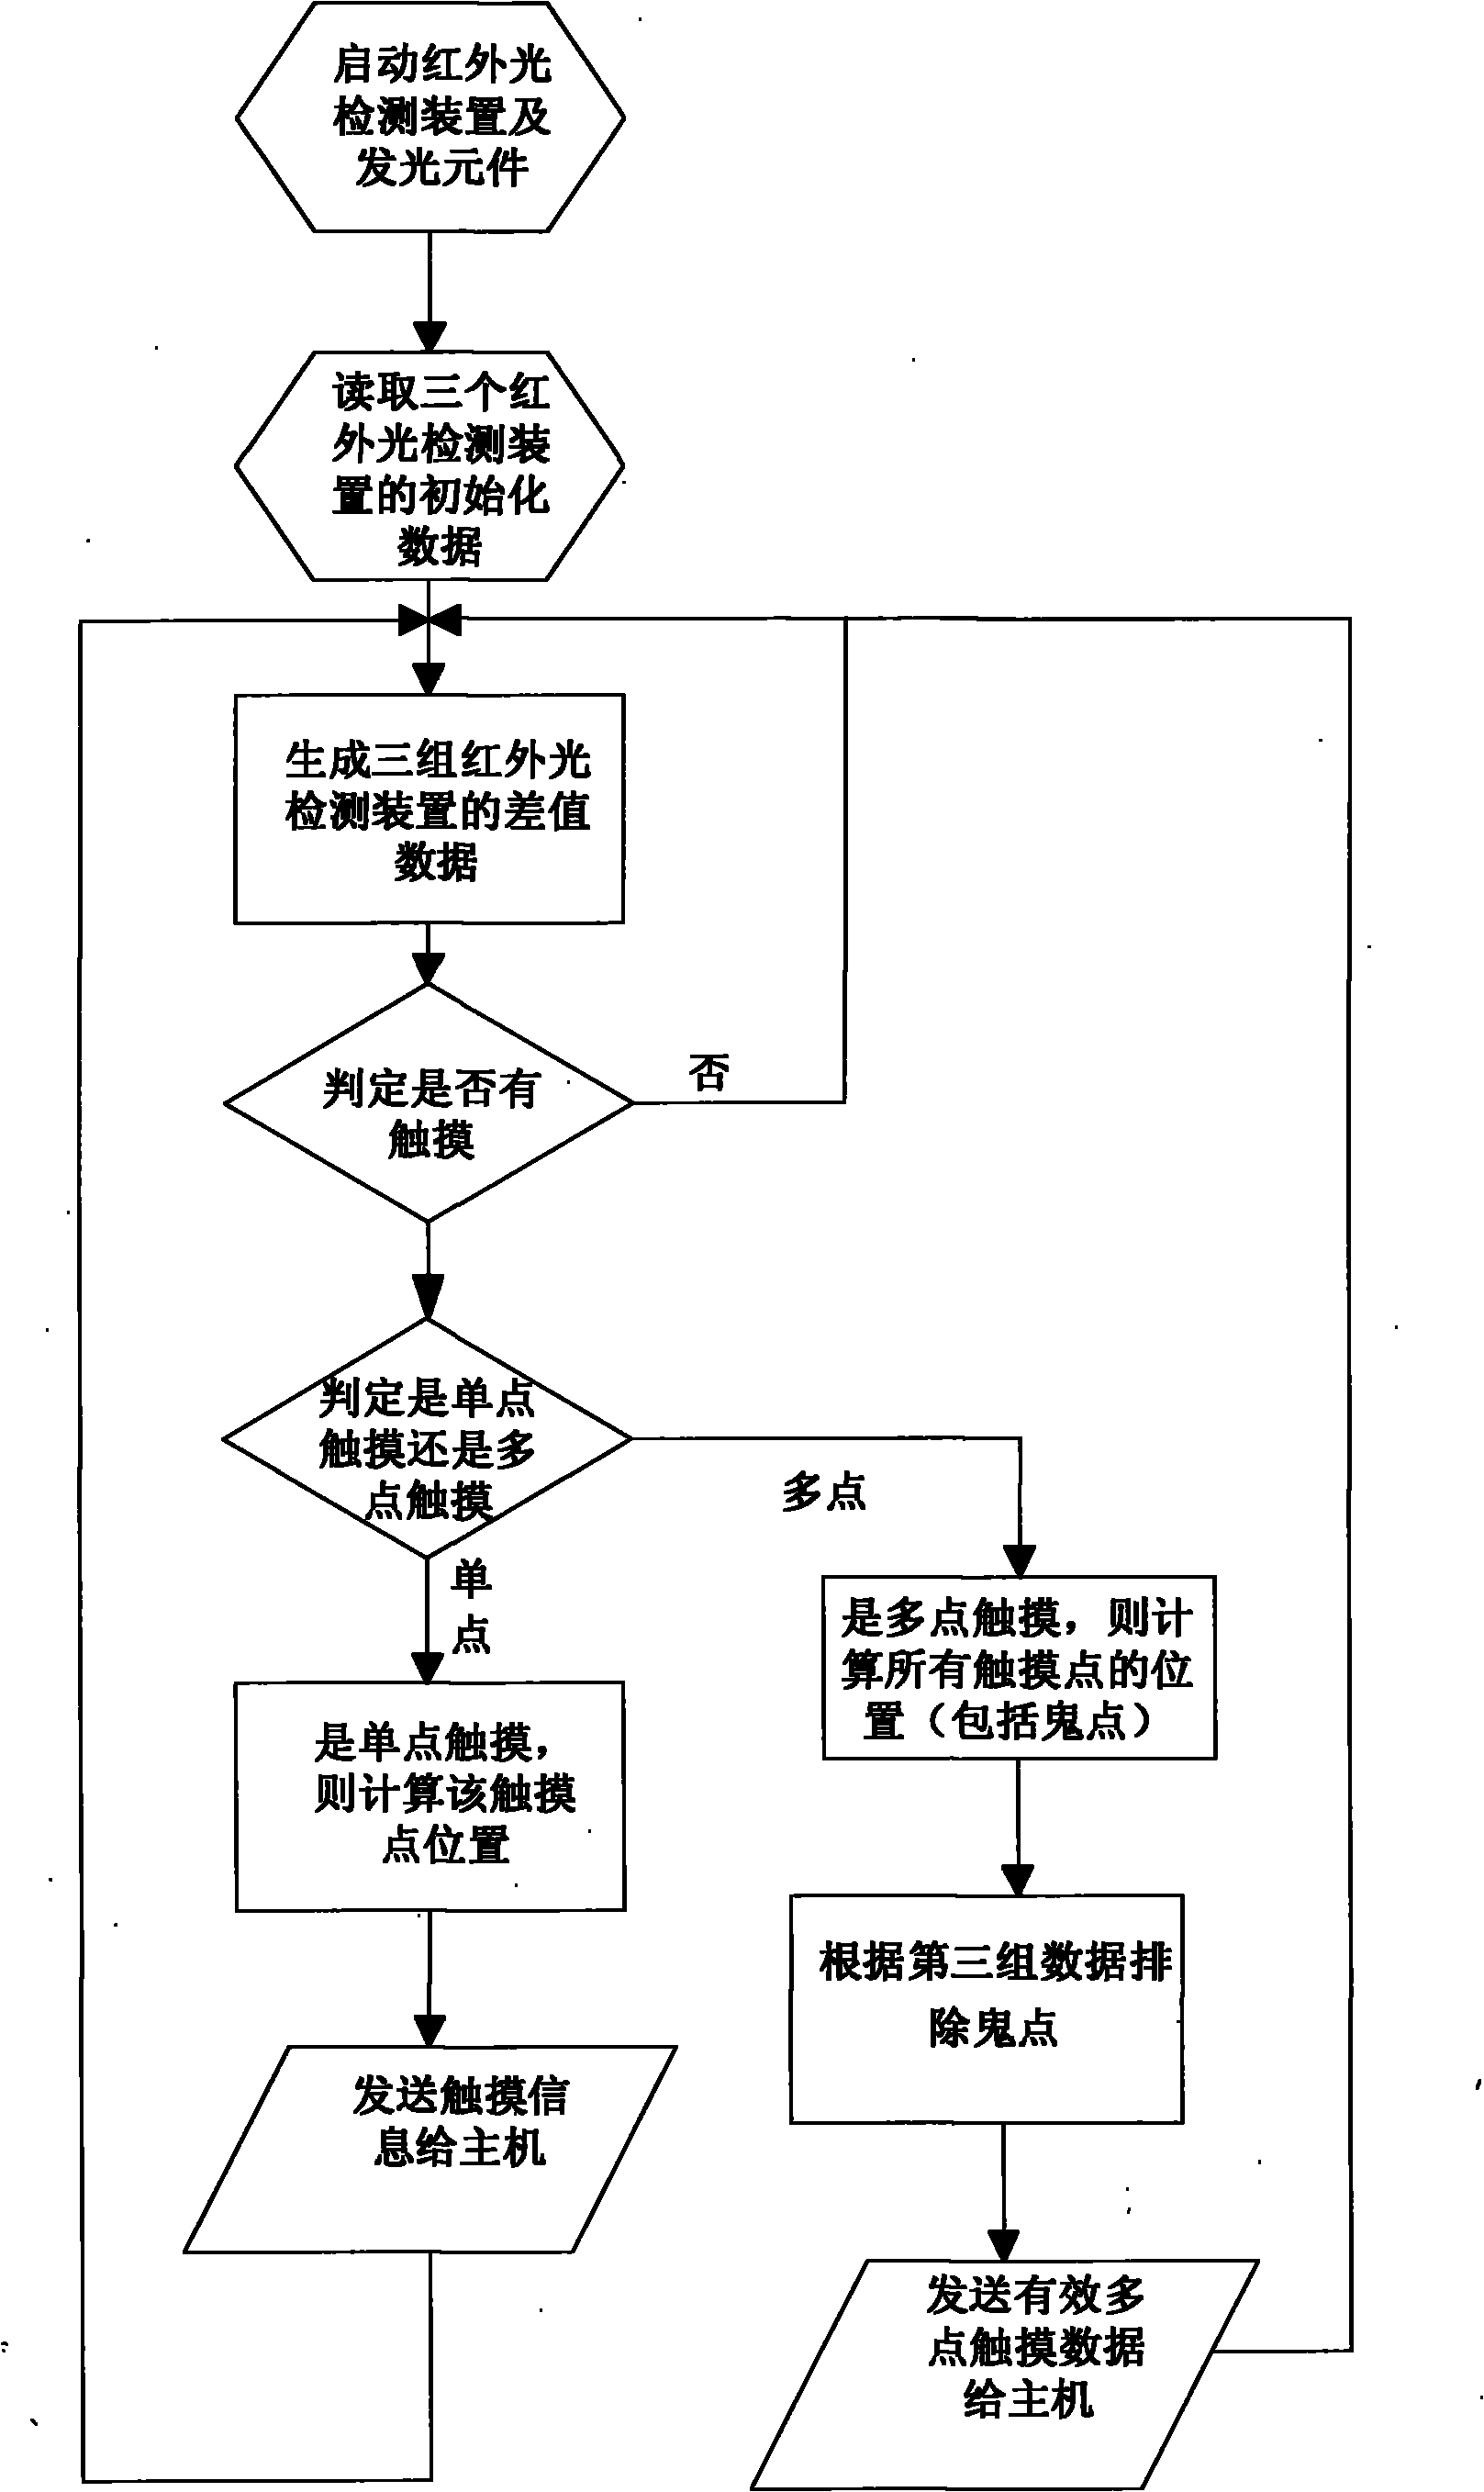 Optical multipoint touch screen and implementation method thereof